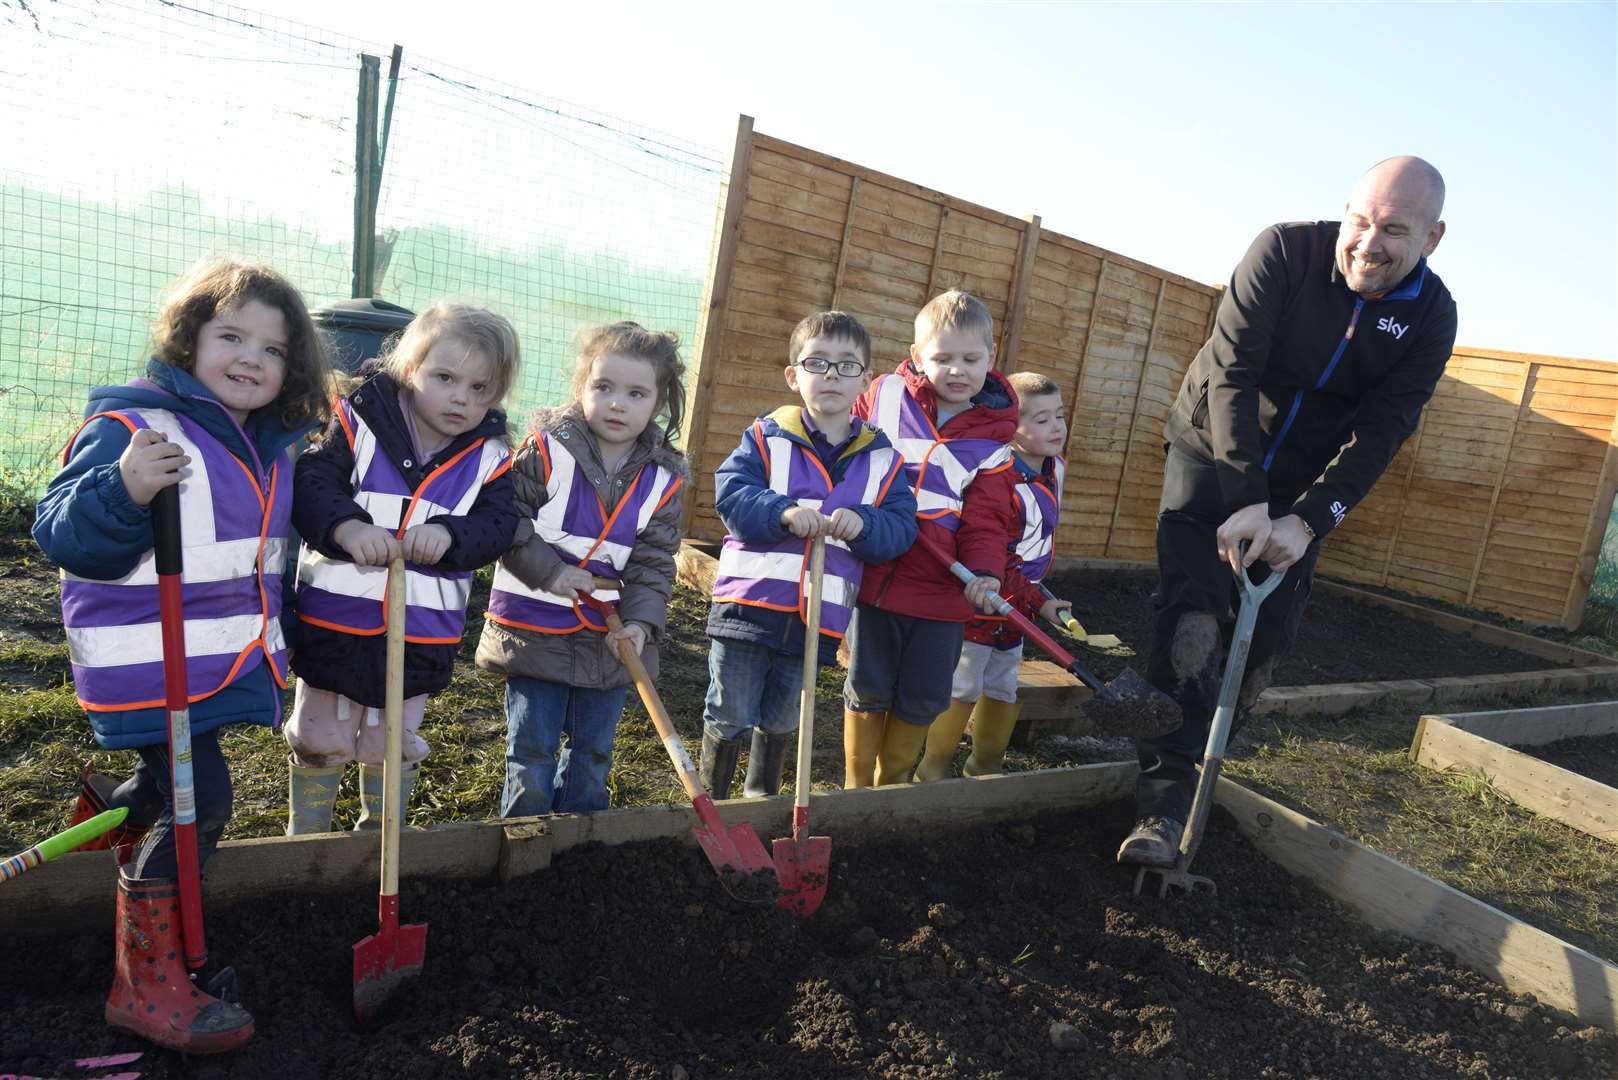 Sky manager Pete Stephenson enlists the help of pupils from the nursery school as works on the Bright Sparks Nursery allotment in Church Lane, Deal